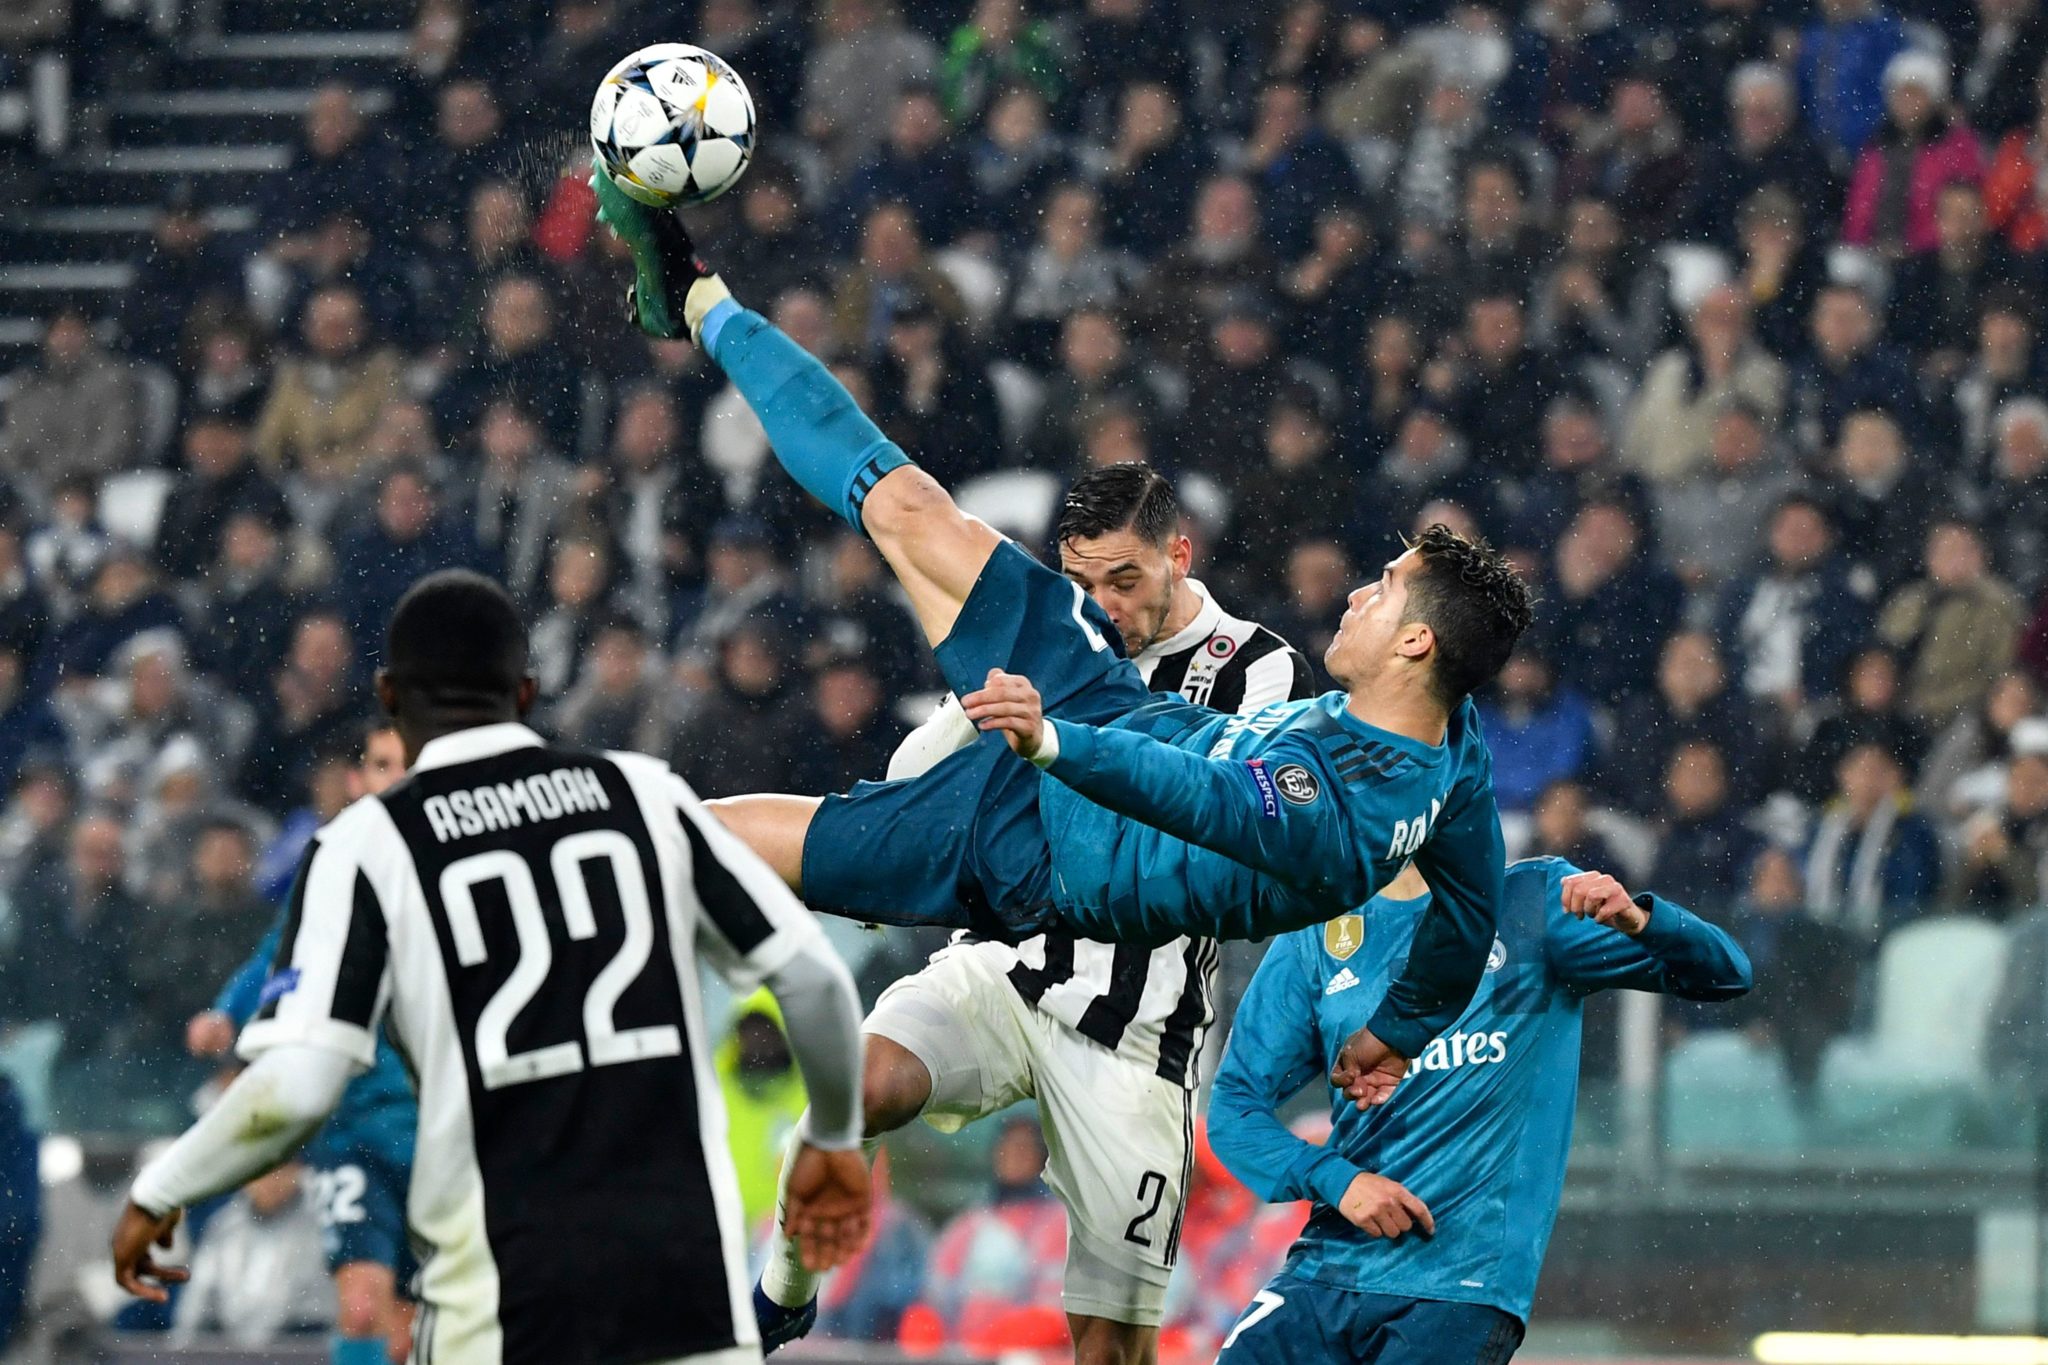 Don't try Ropnaldo's Bicycle Kick at Home, Football Analysts Warn